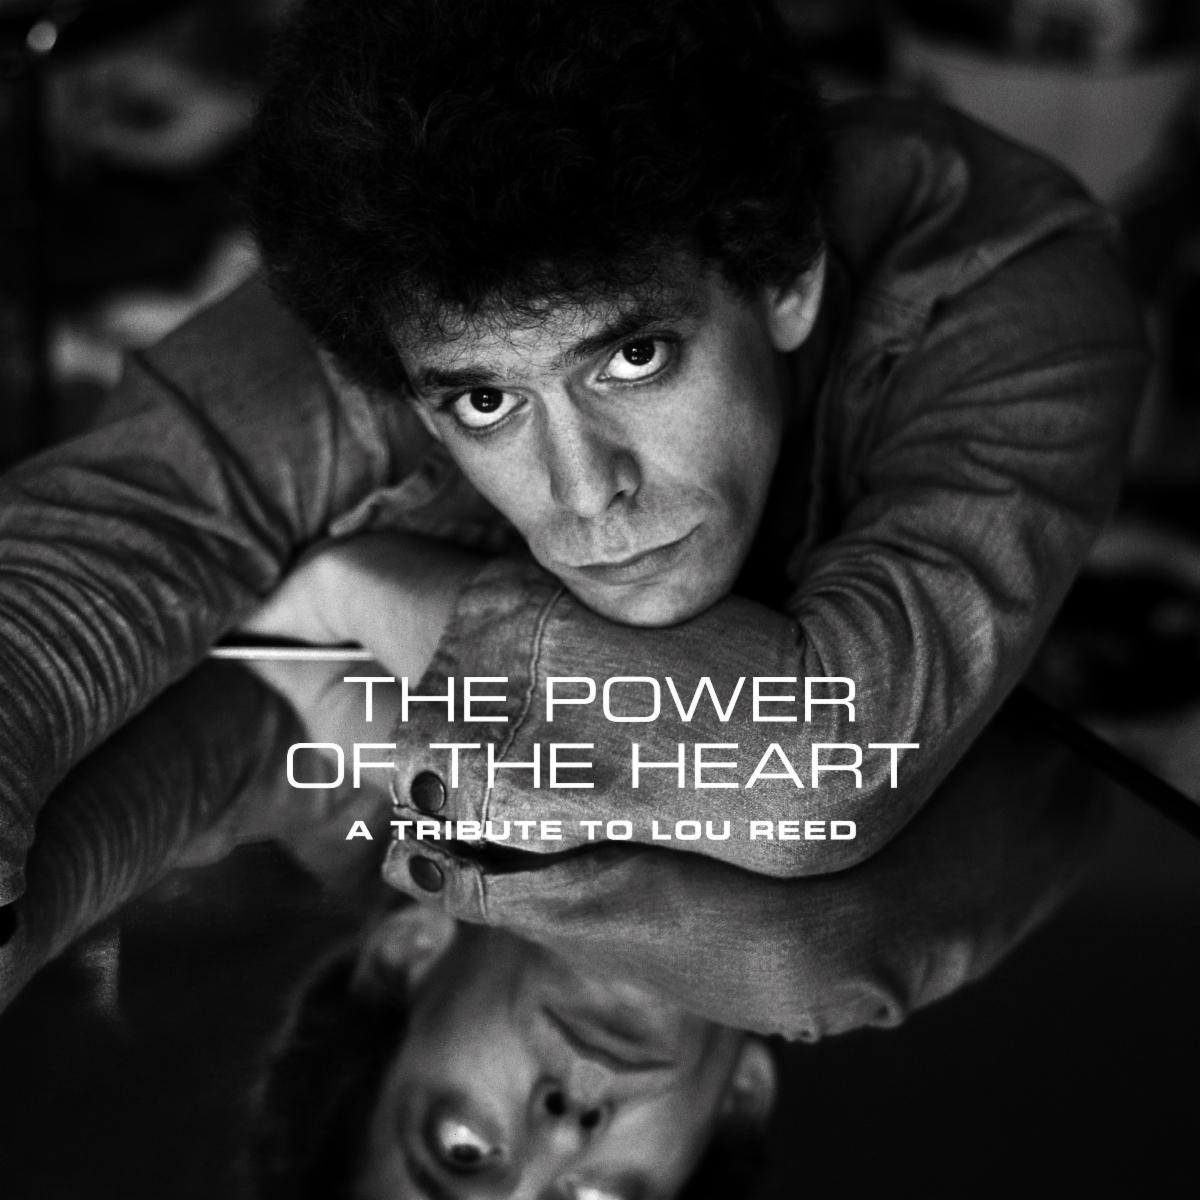 "The Power of the Heart" A Tribute to Lou Reed